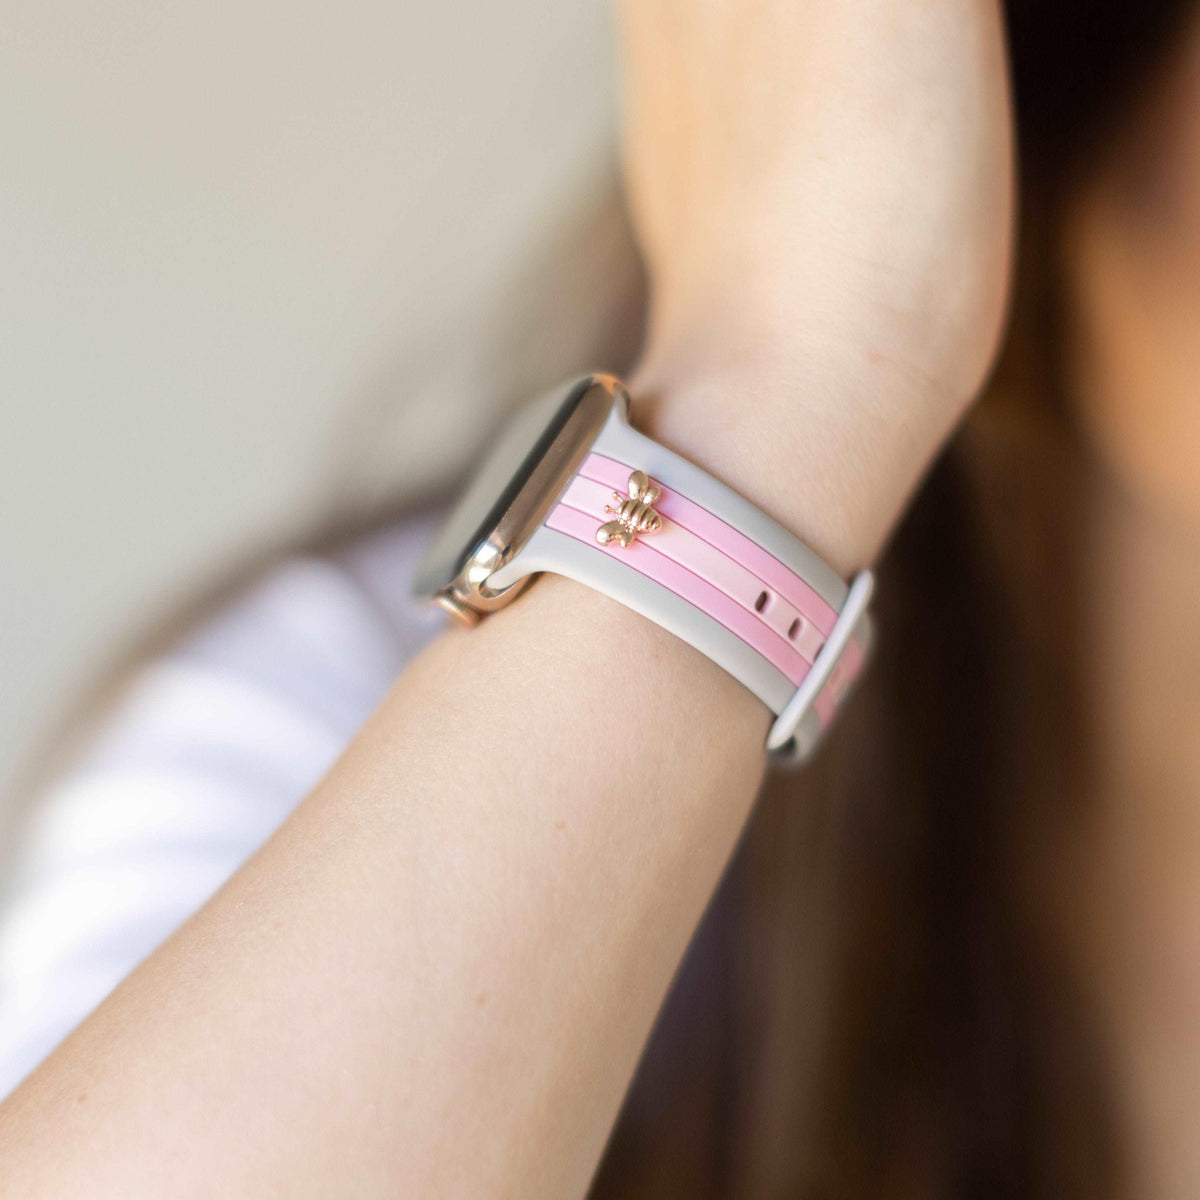 Honey Bee 2.0 Pink and Gray Apple Watch Band - Strawberry Avocados